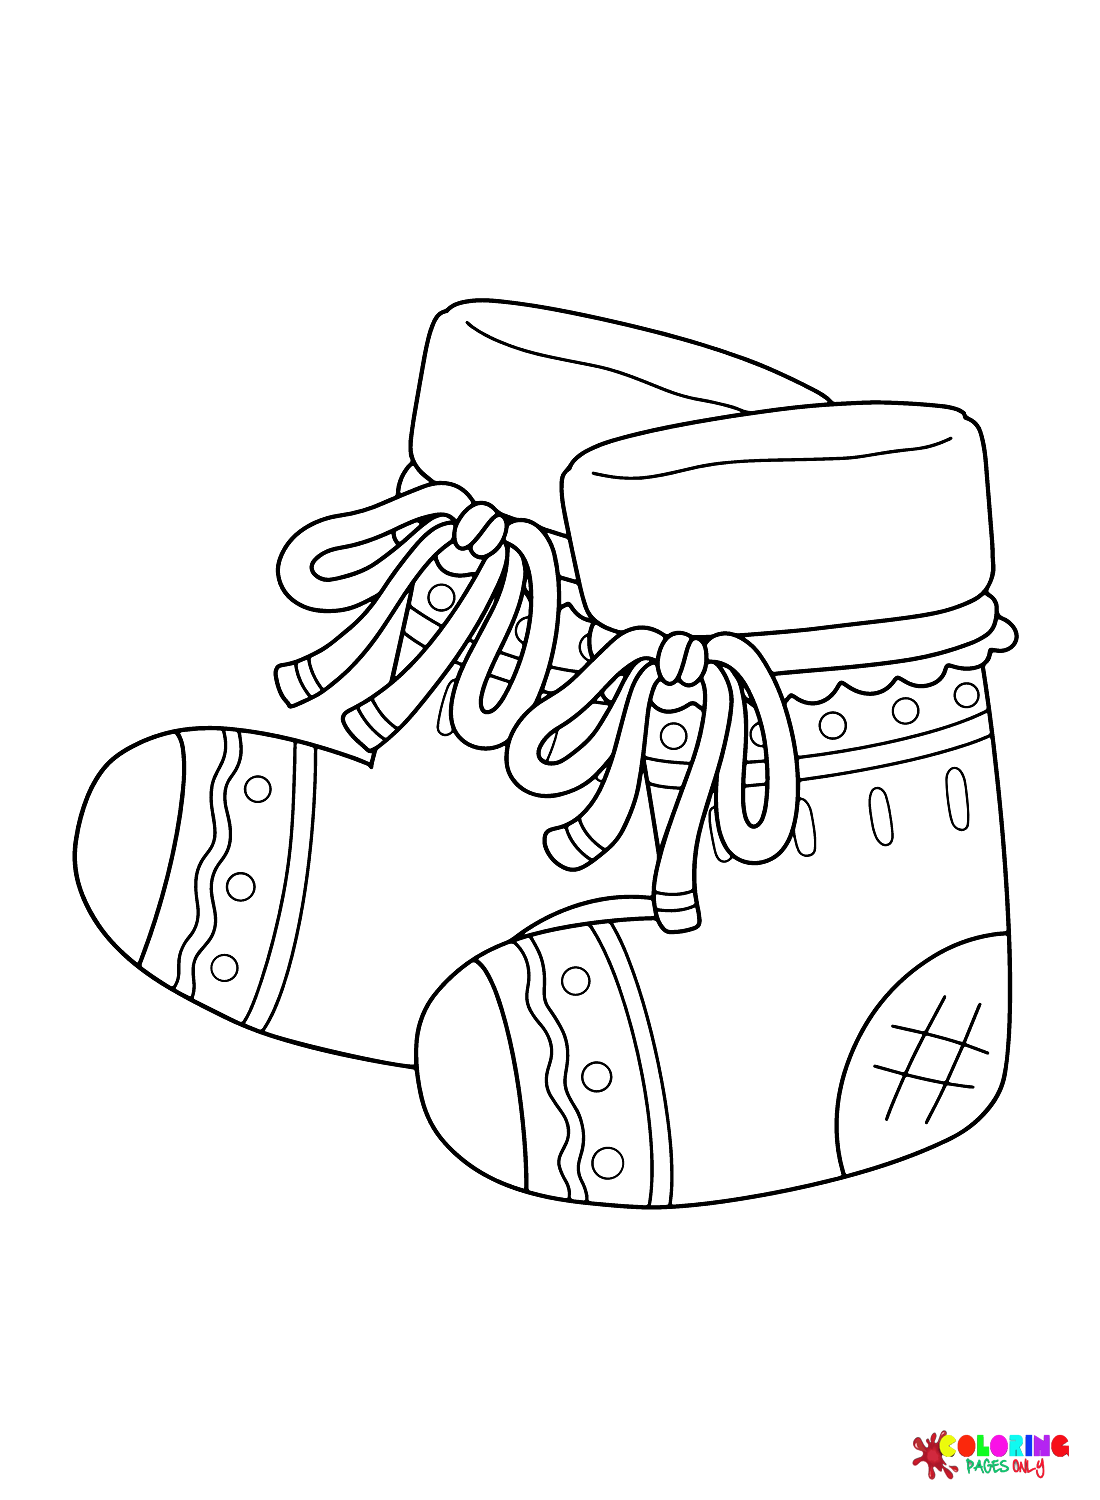 Socks with Hearts Coloring Page - Free Printable Coloring Pages